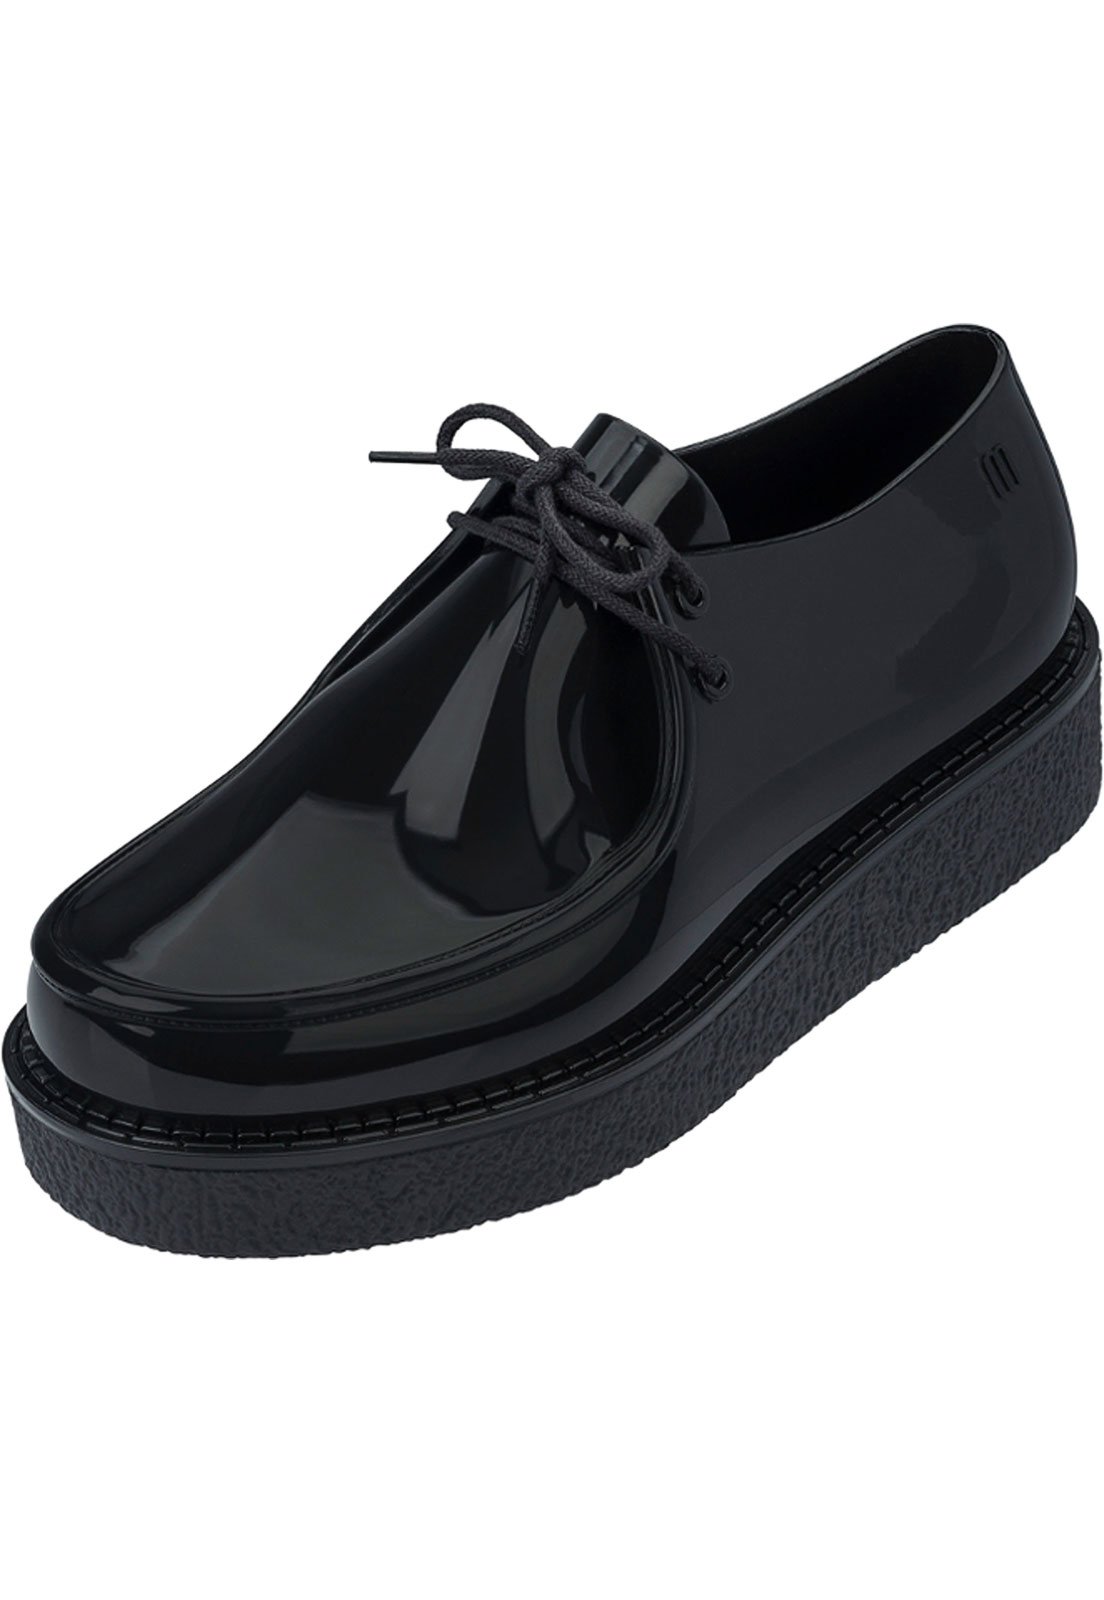 Melissa Womens Billy Creepers Oxford 